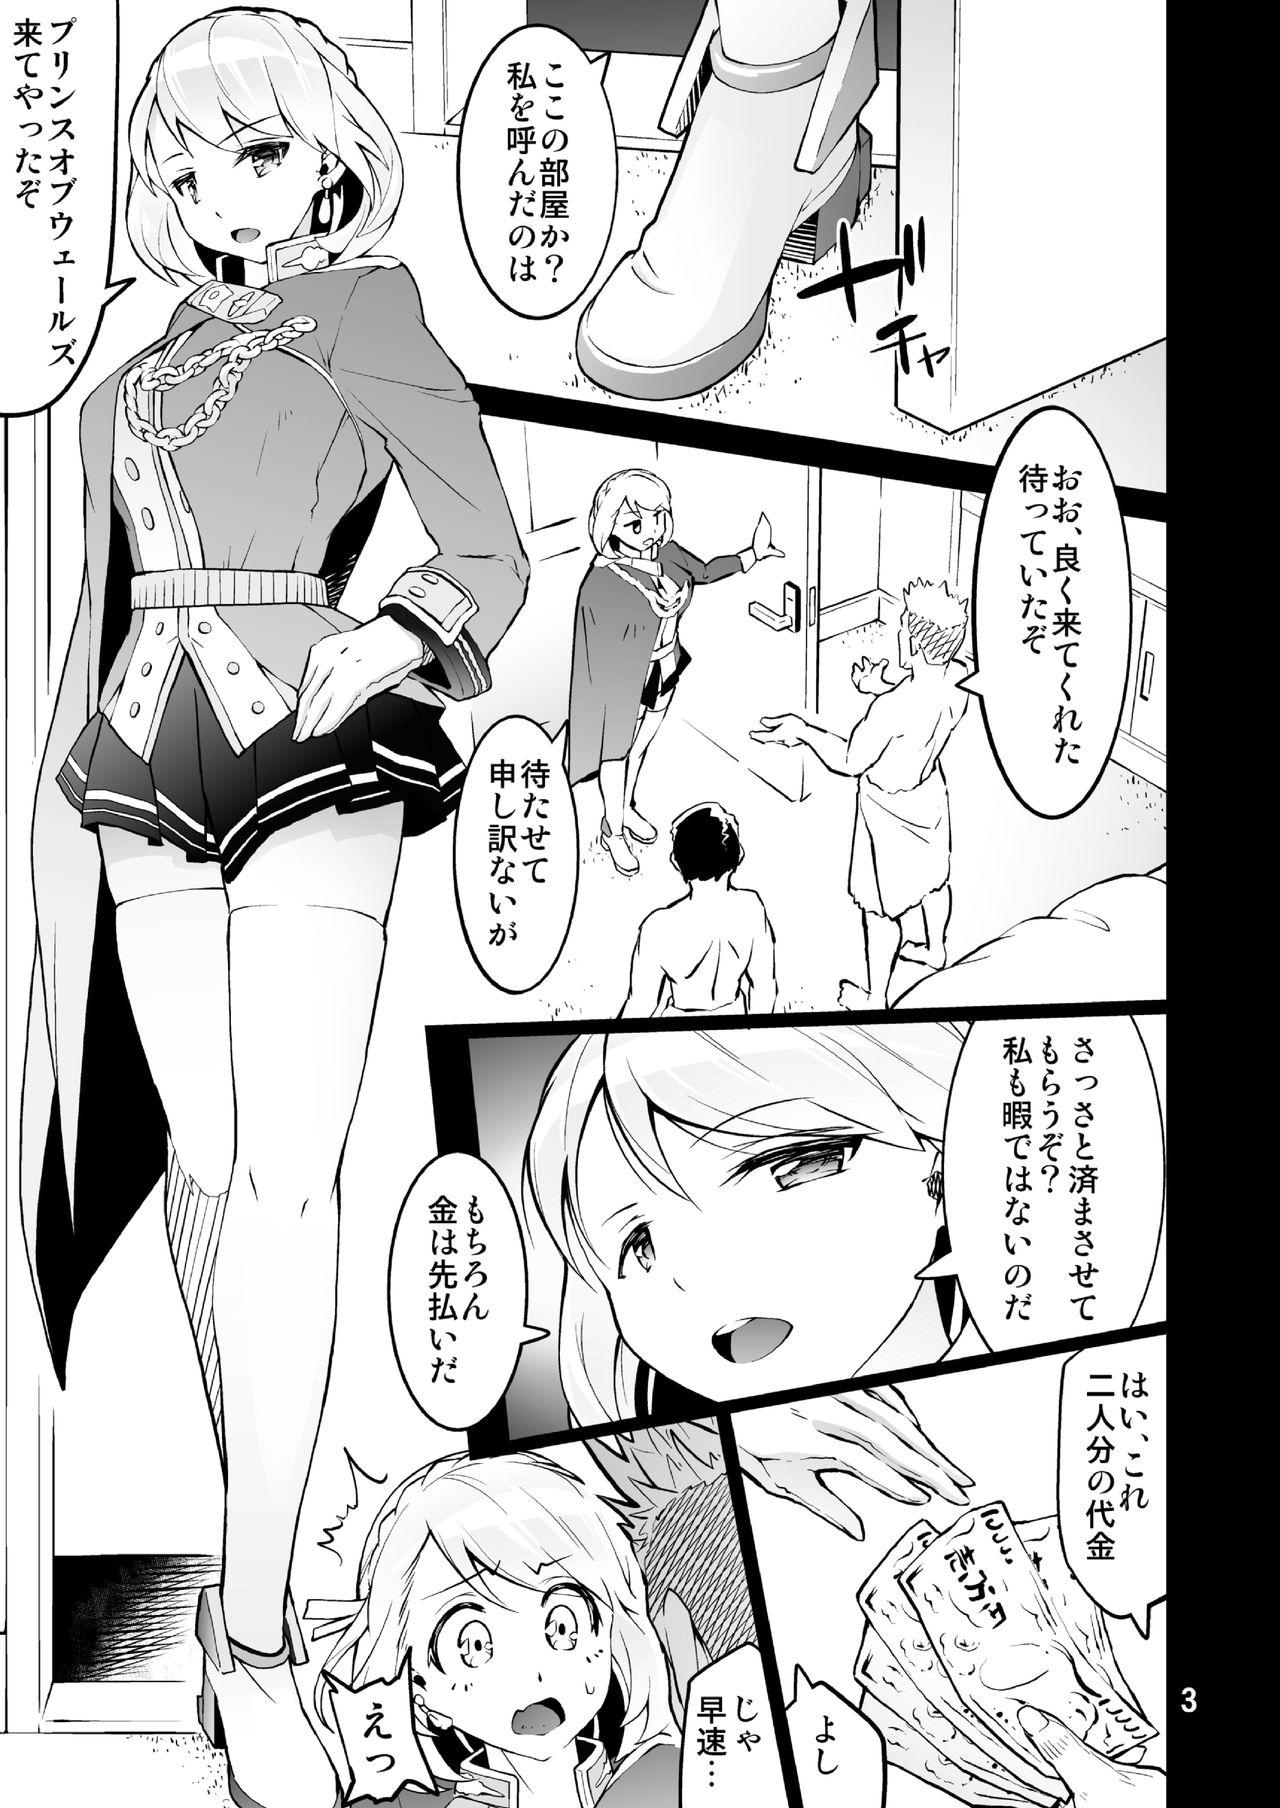 Couple Sex ICE WORK 8 - Azur lane Chica - Page 3